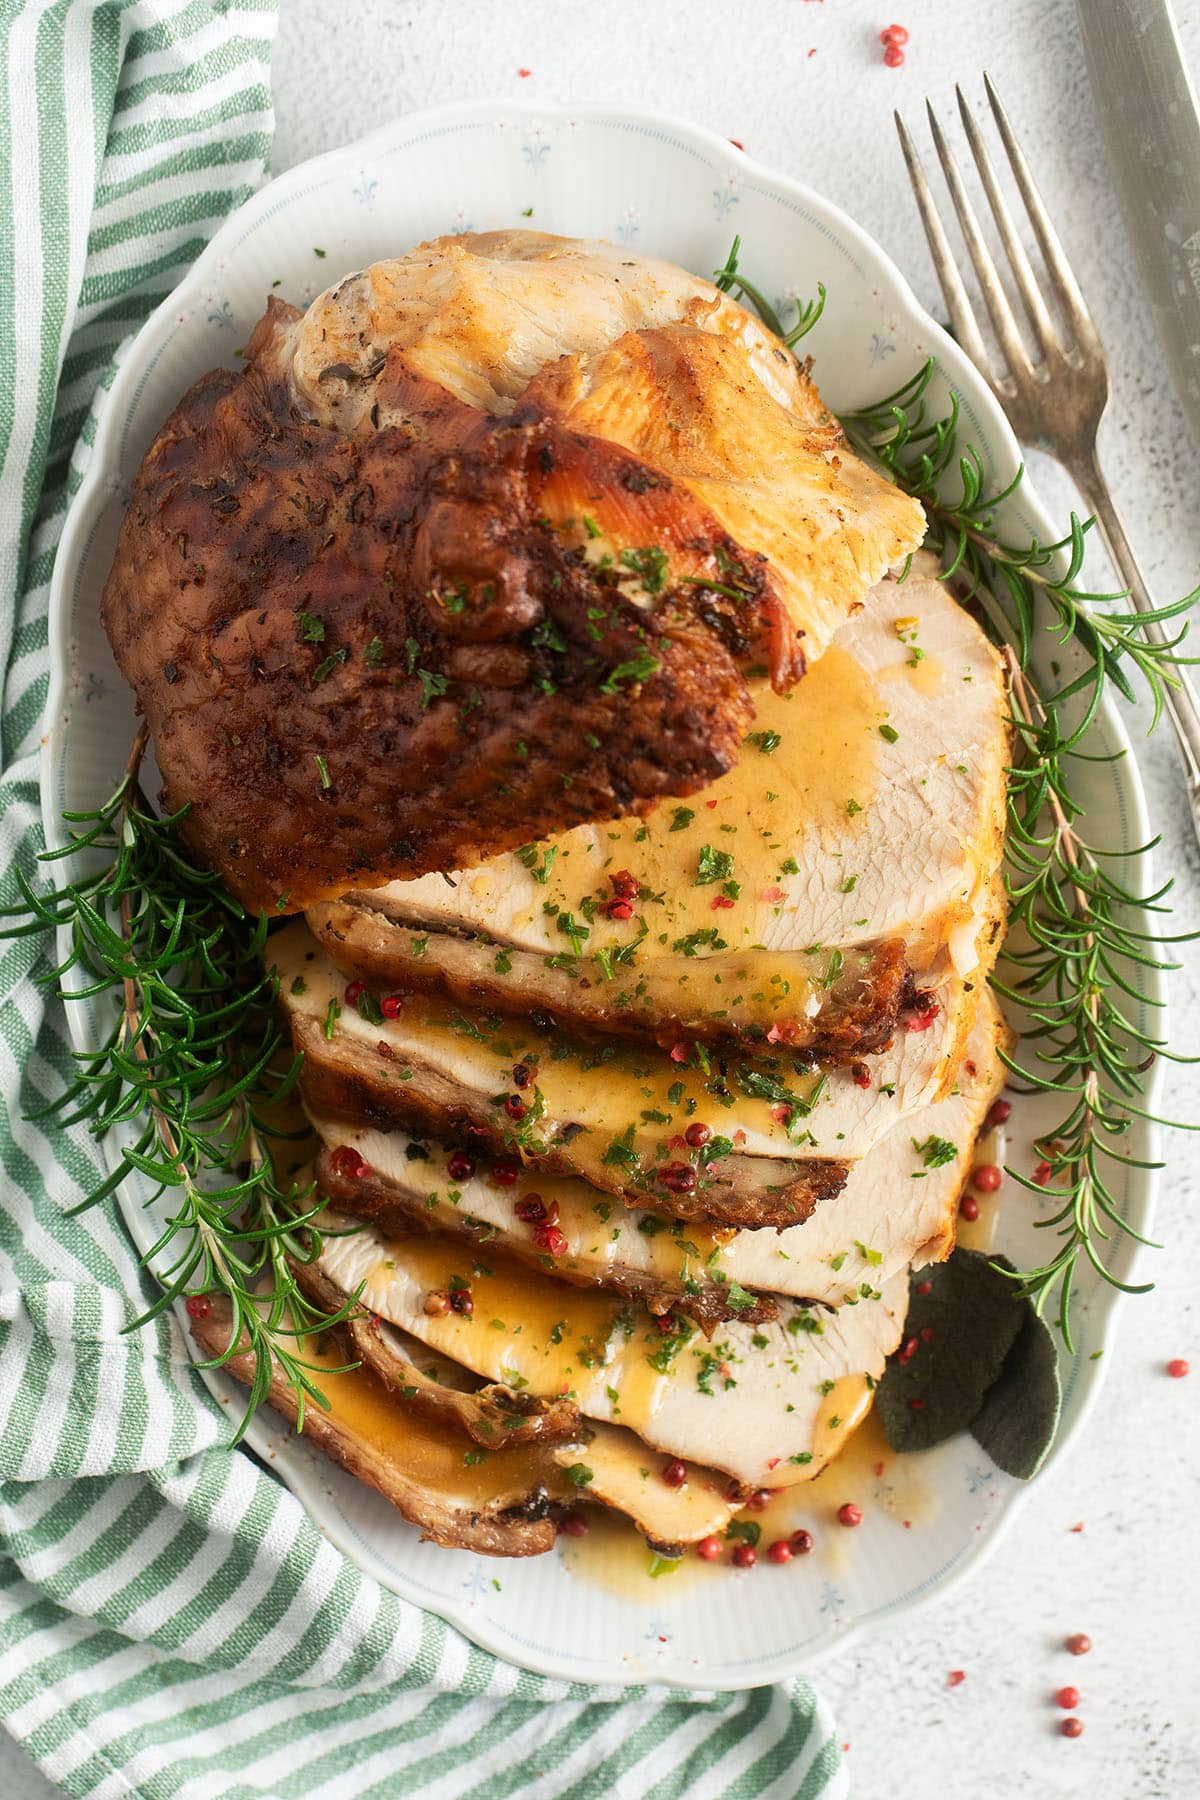 sliced turkey breast with crispy skin and gravy on a platter with rosemary sprigs around it.